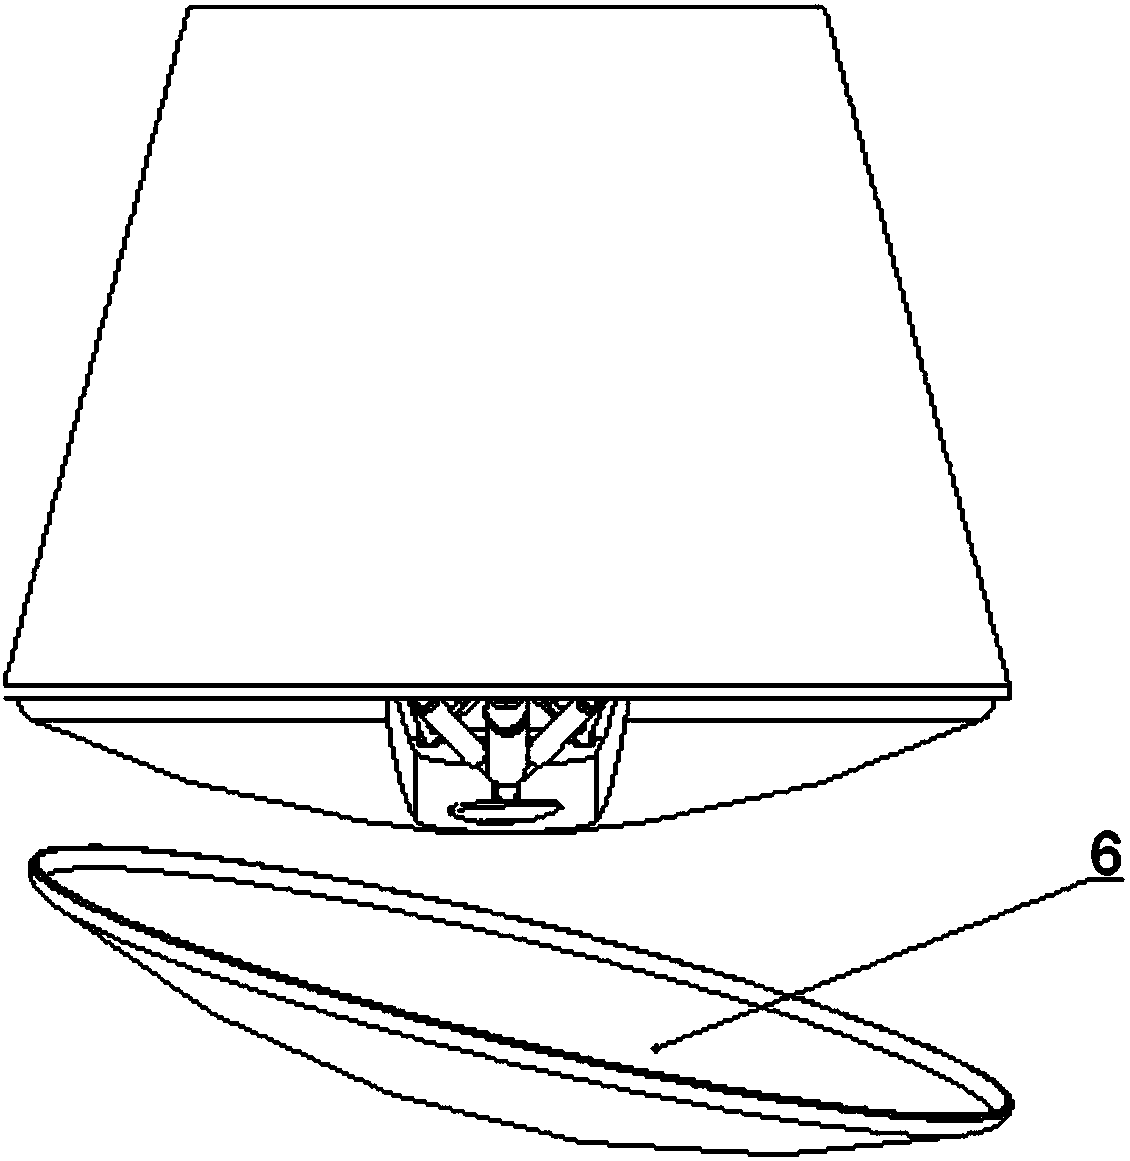 Inverted reusable landing buffer supporting frame of triangle spacecraft